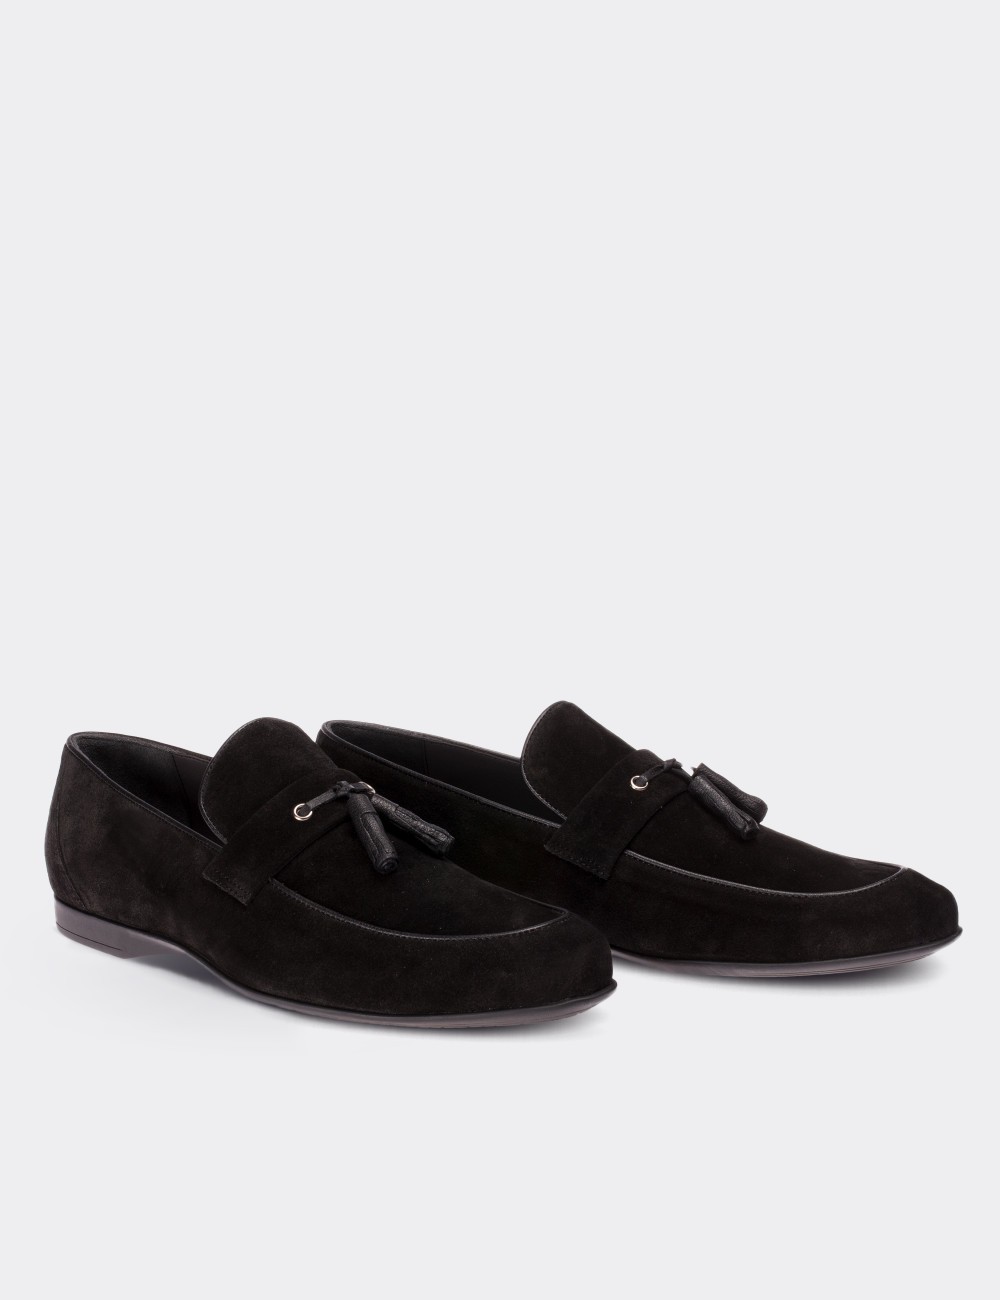 Black Suede Leather Loafers & Moccasins Shoes - 01537MSYHC02